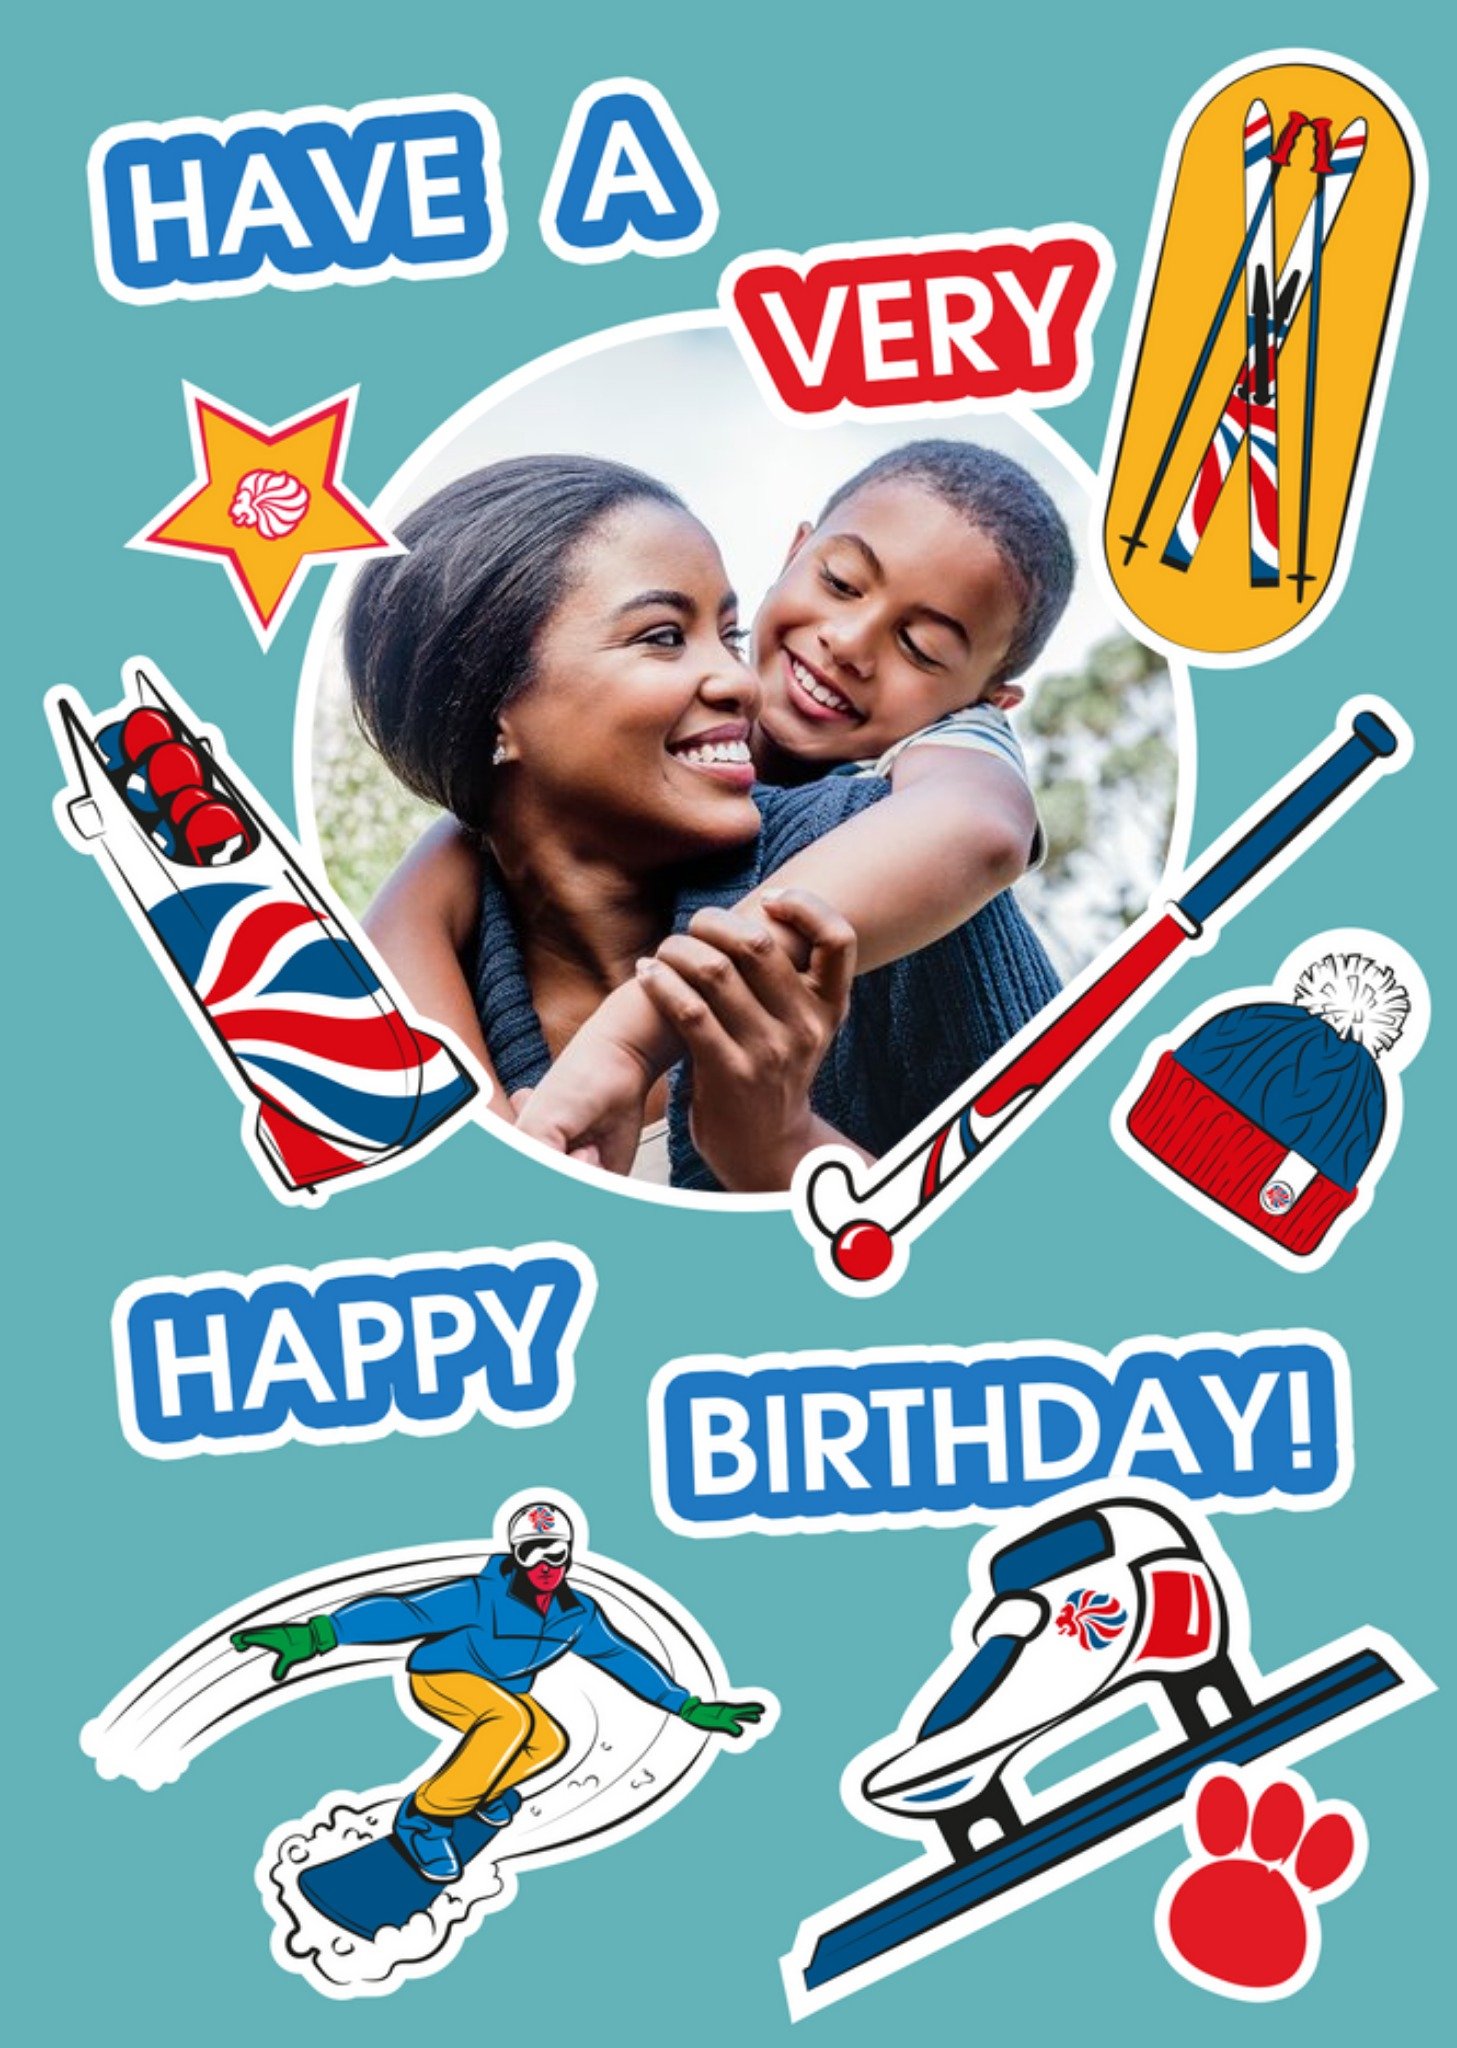 Moonpig Team Gb Have A Very Happy Birthday Photo Upload Card, Large